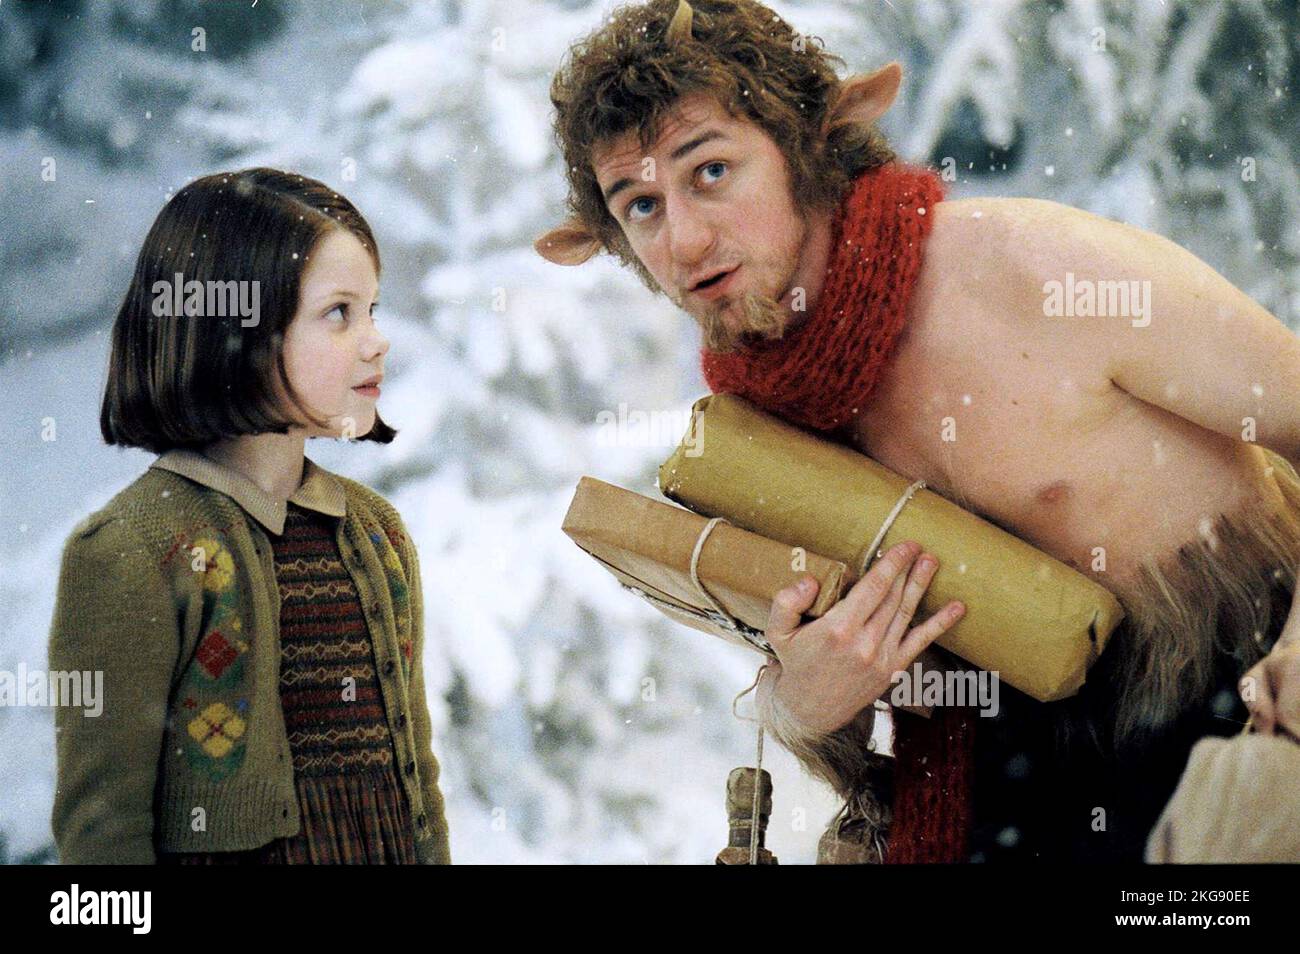 The Chronicles of Narnia: The Lion, the Witch and the Wardrobe  Georgie Henley & James McAvoy Stock Photo